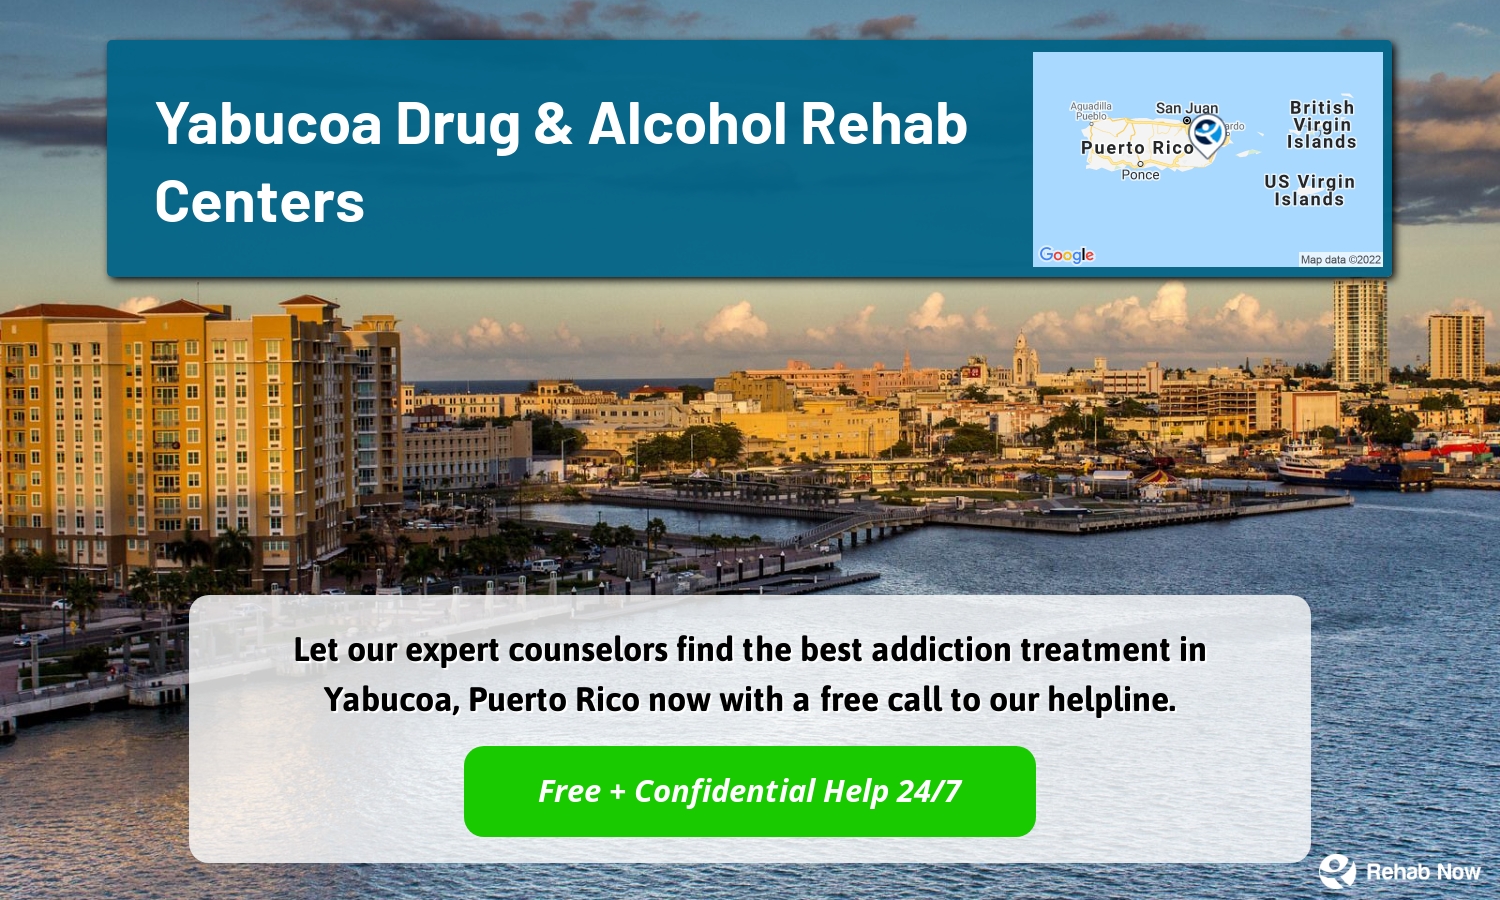 Let our expert counselors find the best addiction treatment in Yabucoa, Puerto Rico now with a free call to our helpline.